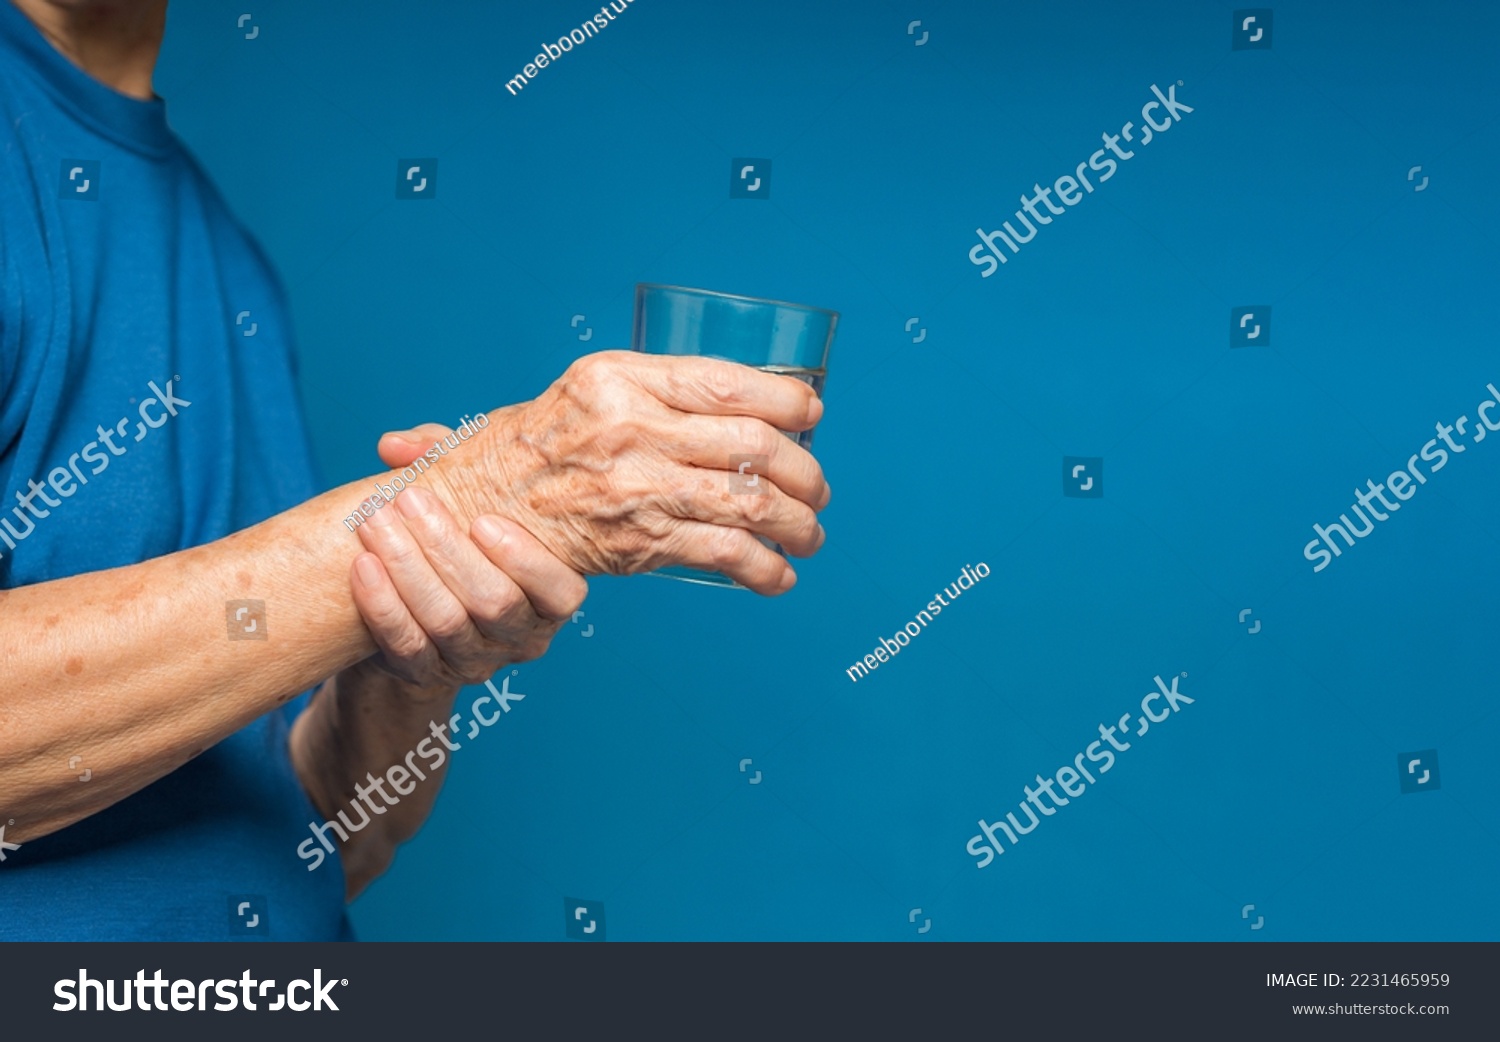 Close-up of hands senior woman trying to hold a glass of water. Causes of hand shaking include Parkinson's disease, stroke, or brain injury. Mental health neurological disorder #2231465959